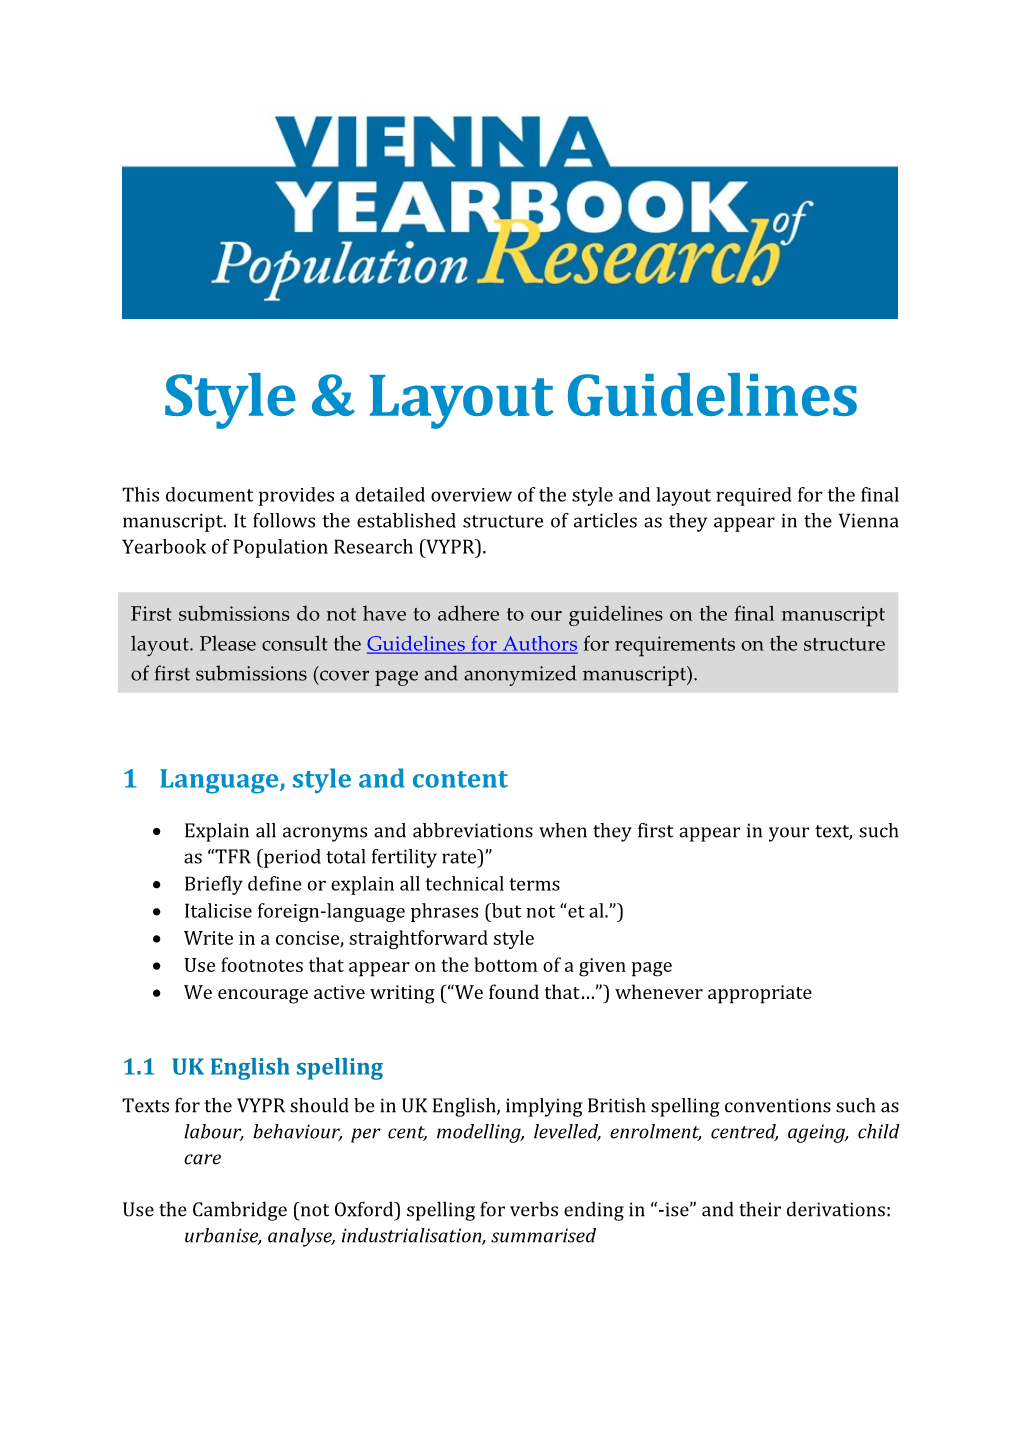 VYPR Style & Layout Guidelines